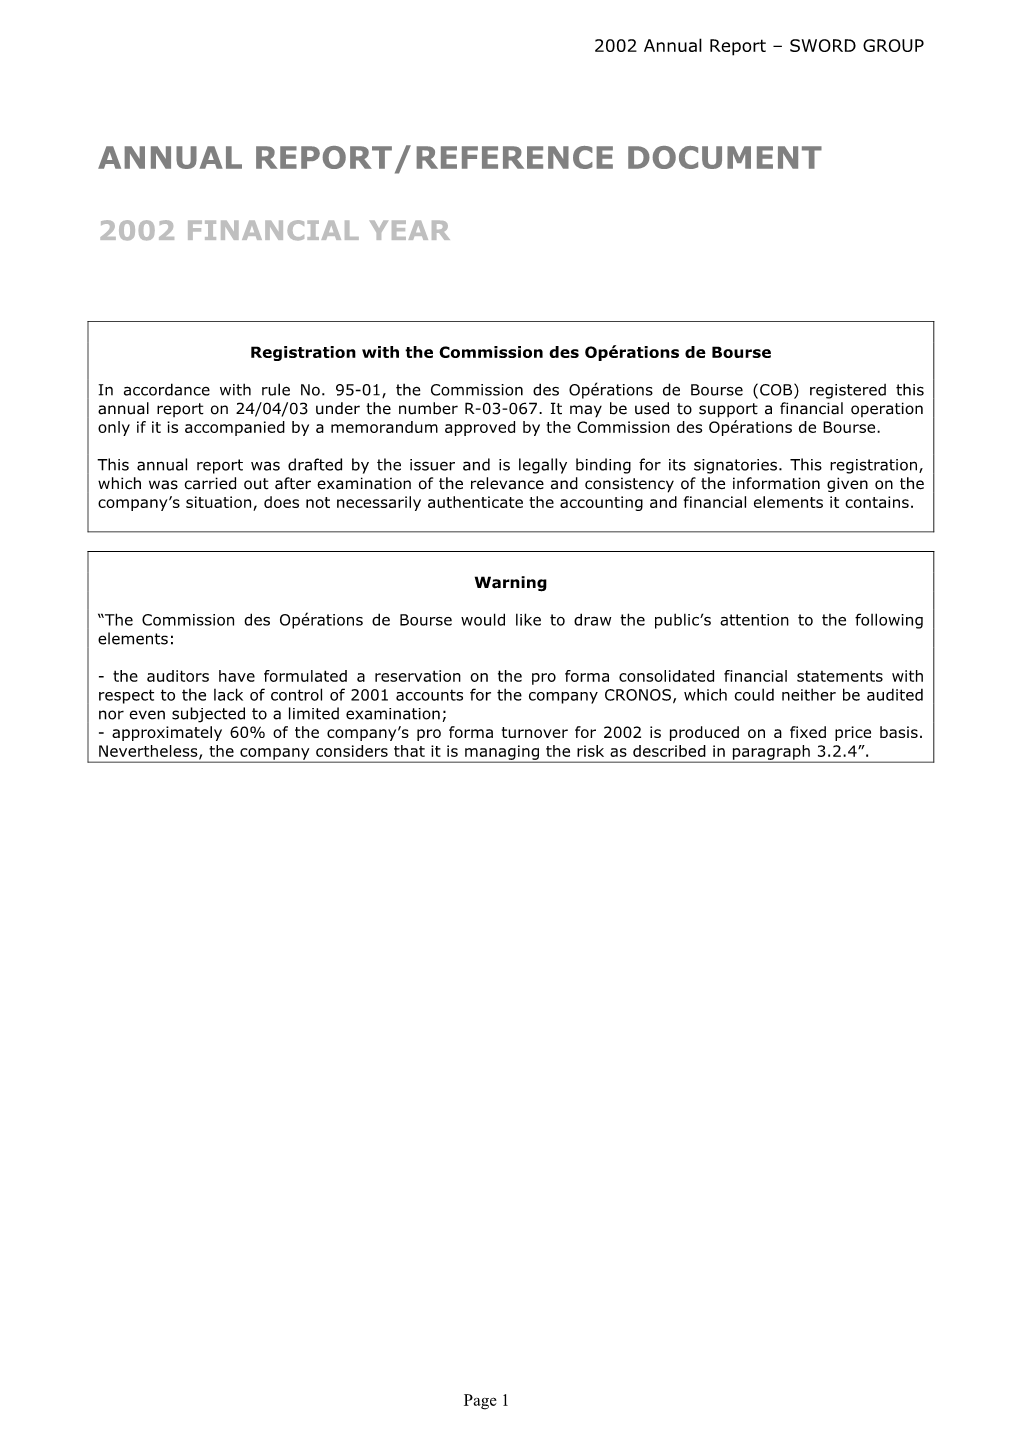 Annual Report/Reference Document